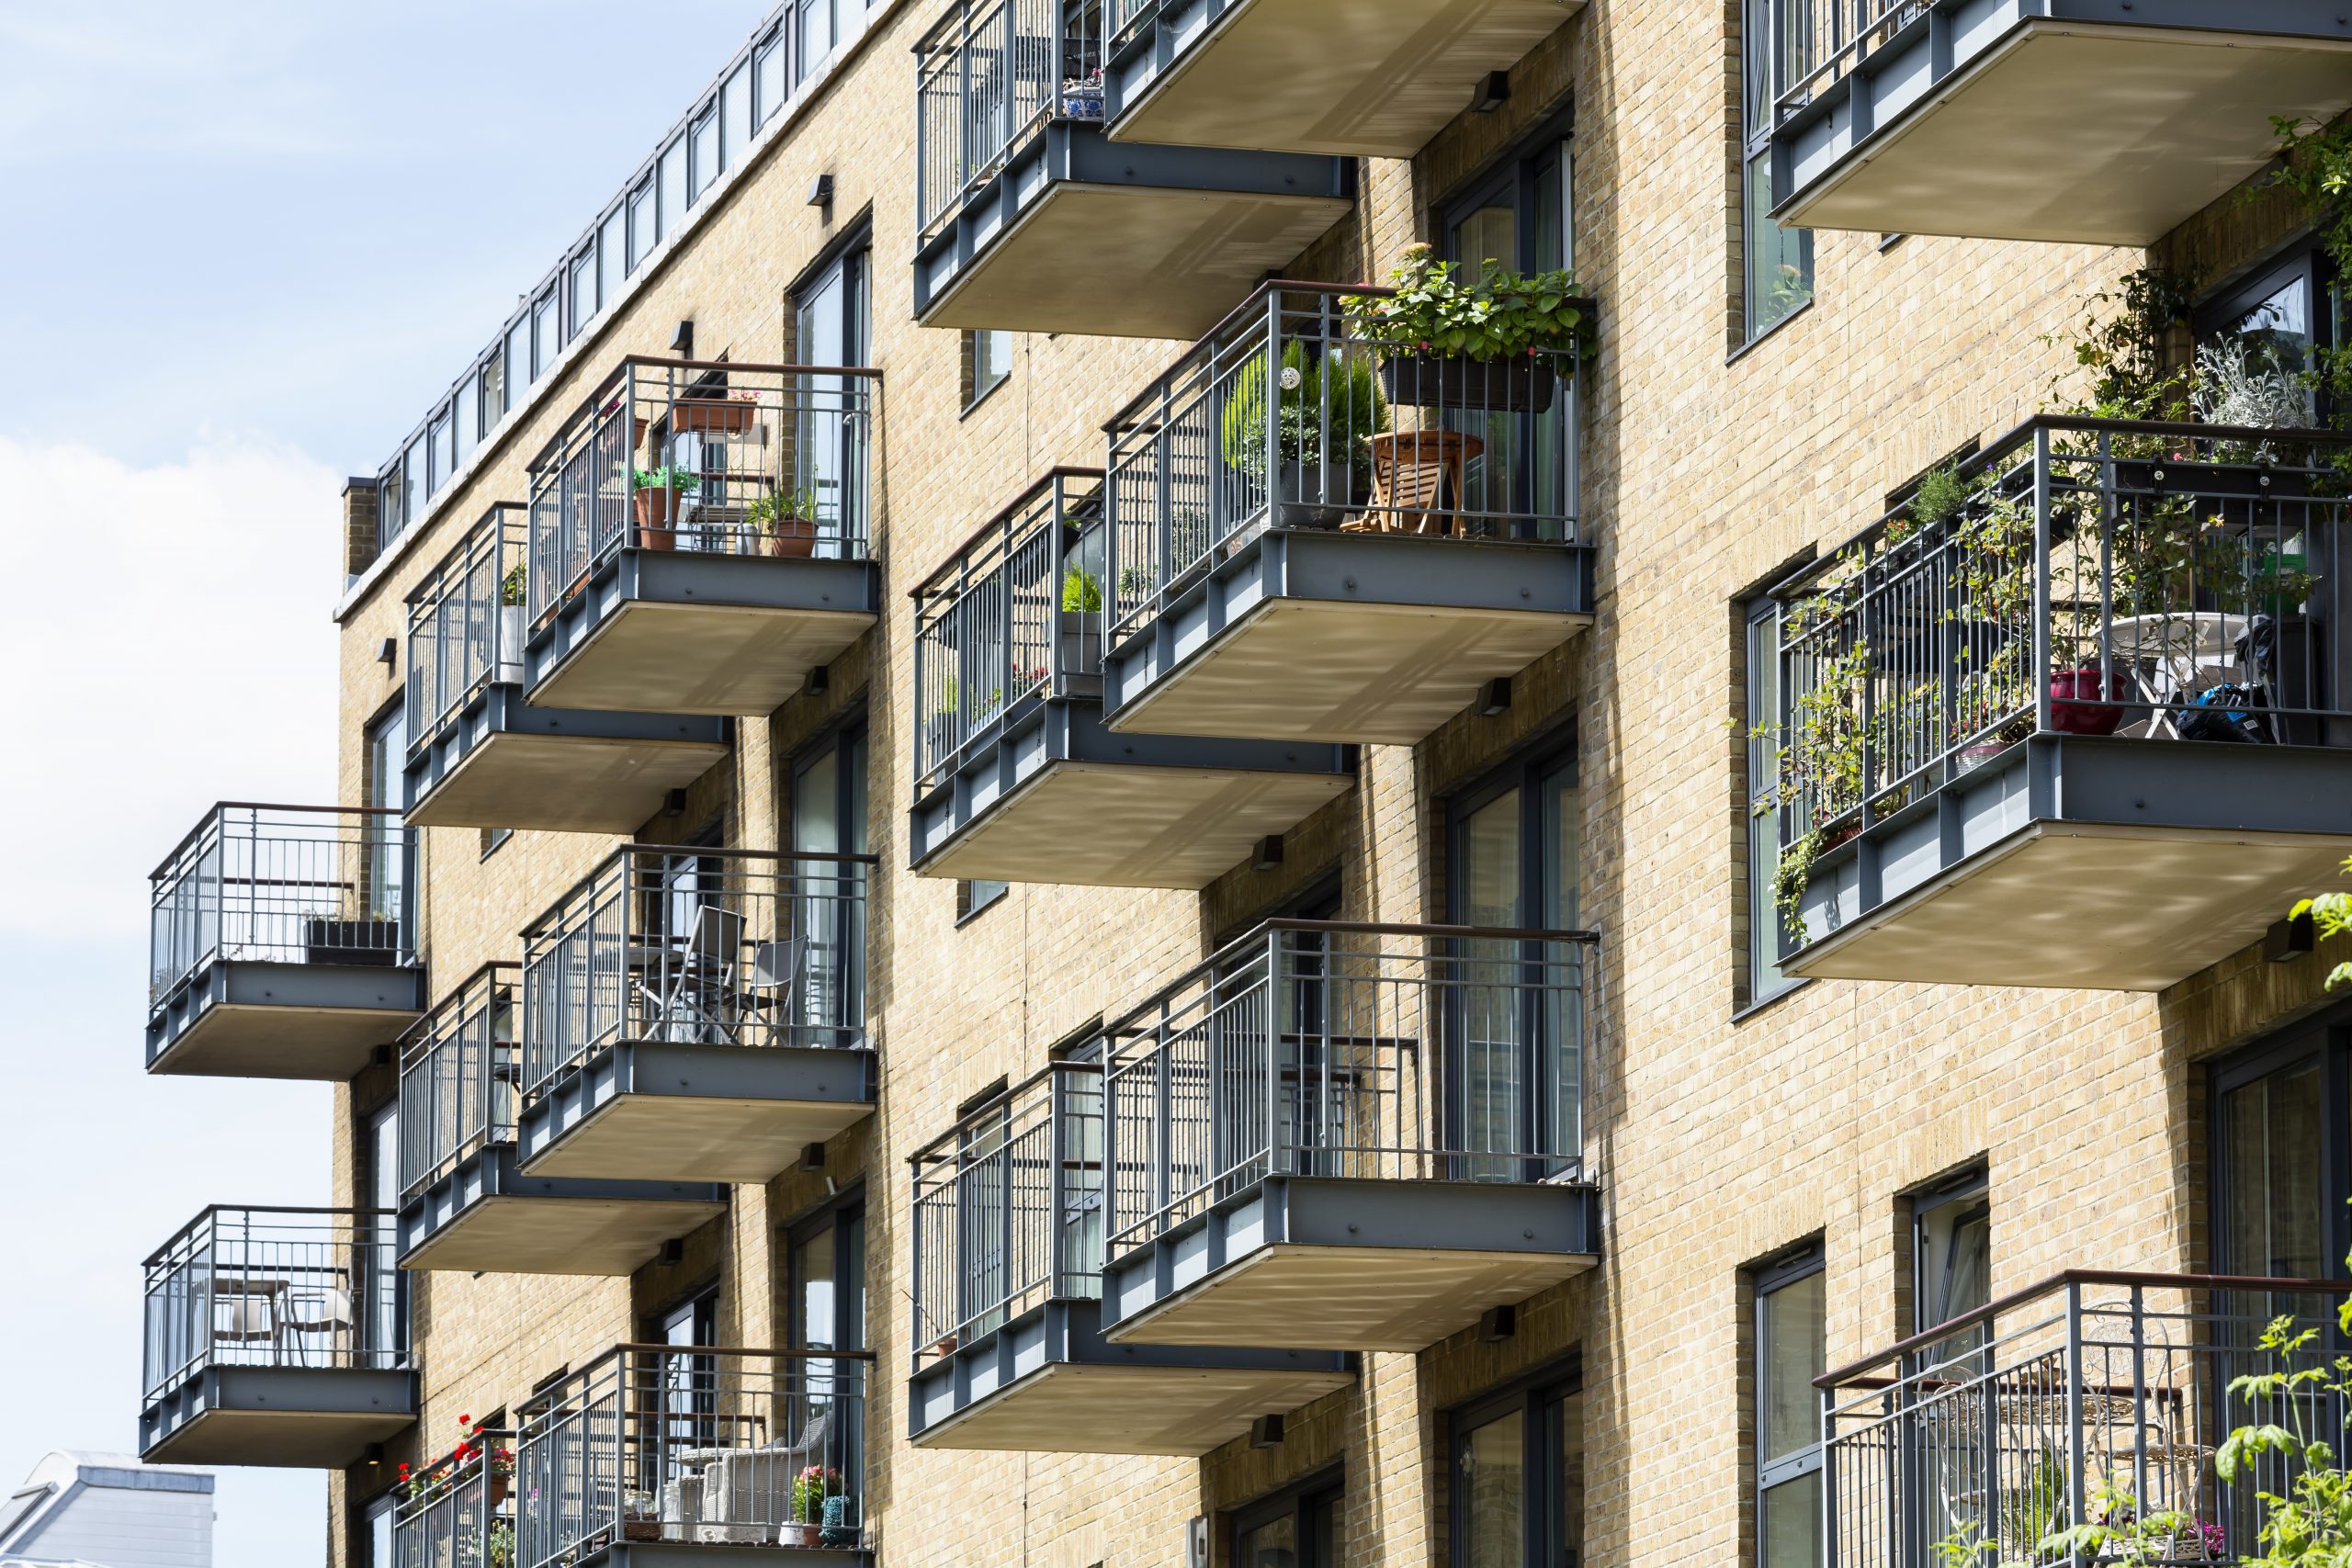 Close-up view of a typical riverside balconies in London